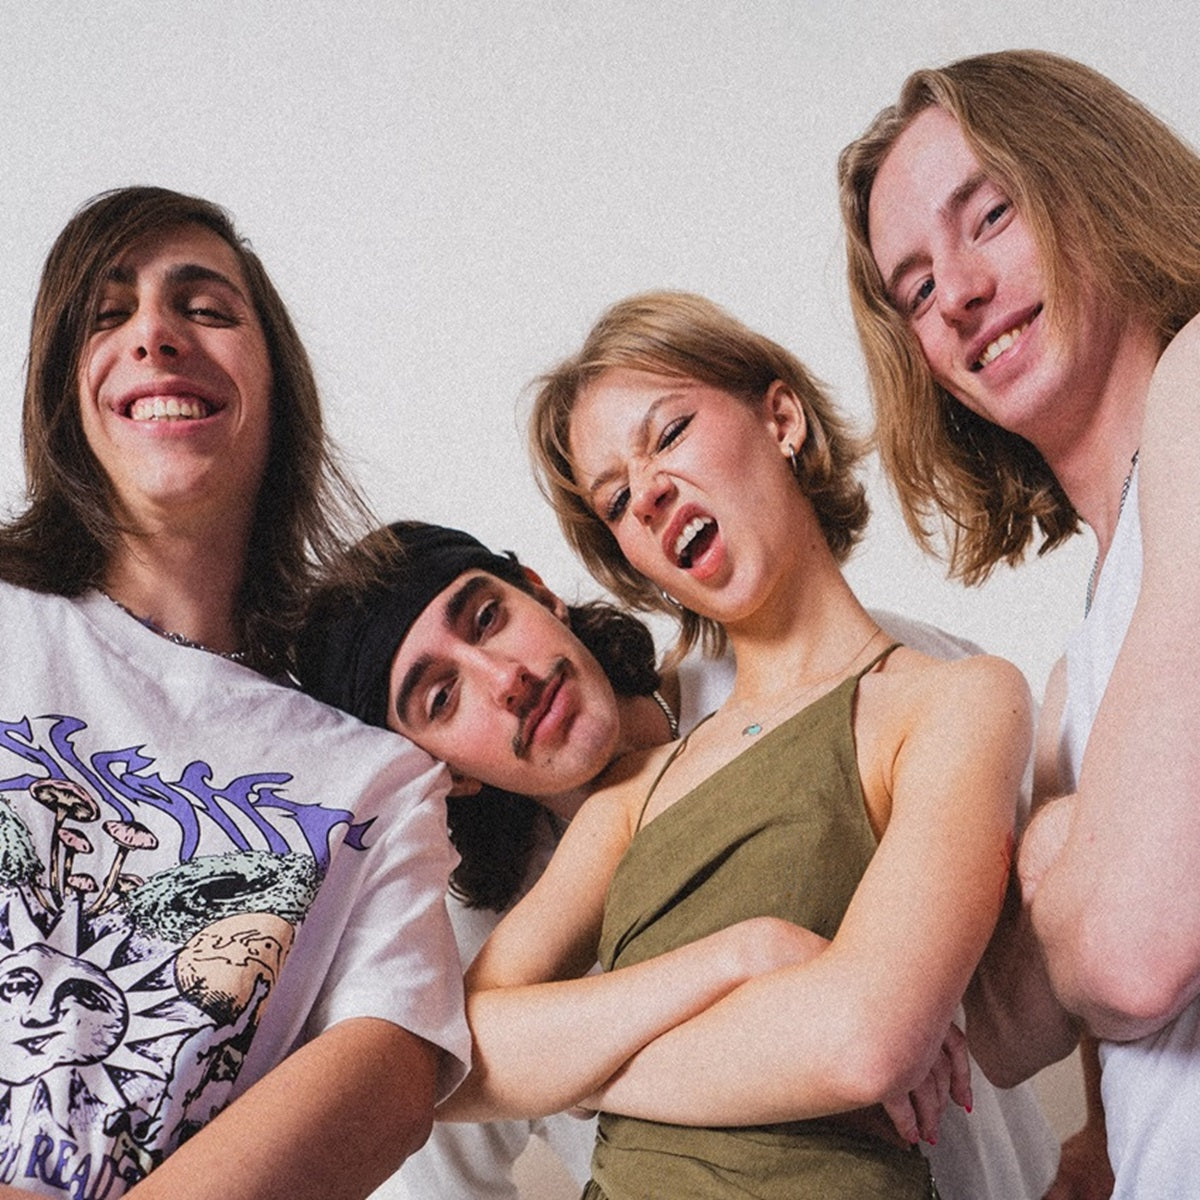 Perth’s Shorehaven Drop Their Stellar Debut EP, 'Milly’s Car Ride'